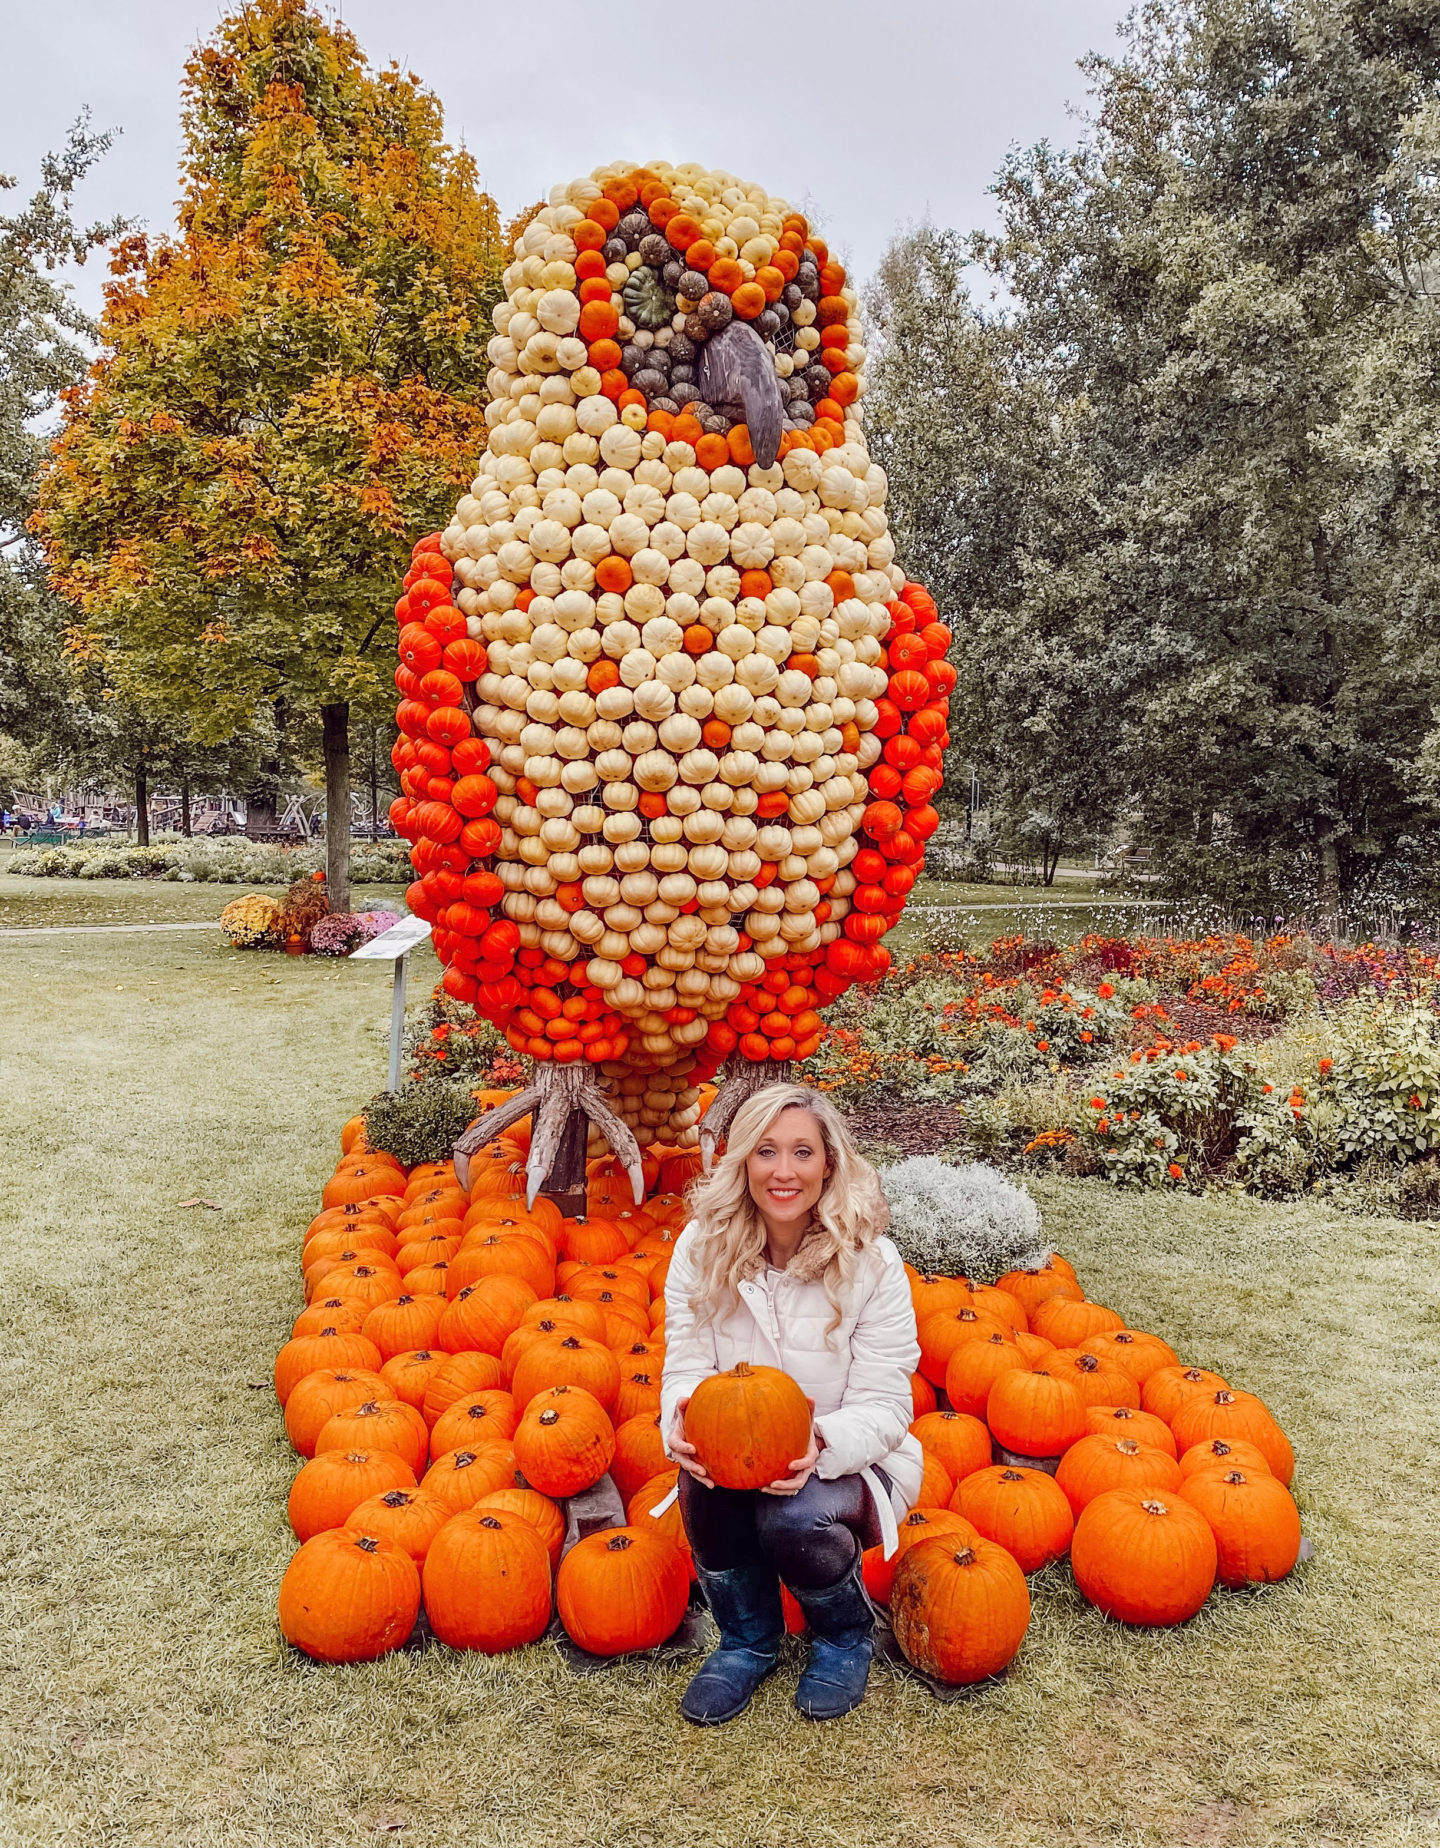 Ultimate Guide to the Best Pumpkin Patches and Festivals in Germany